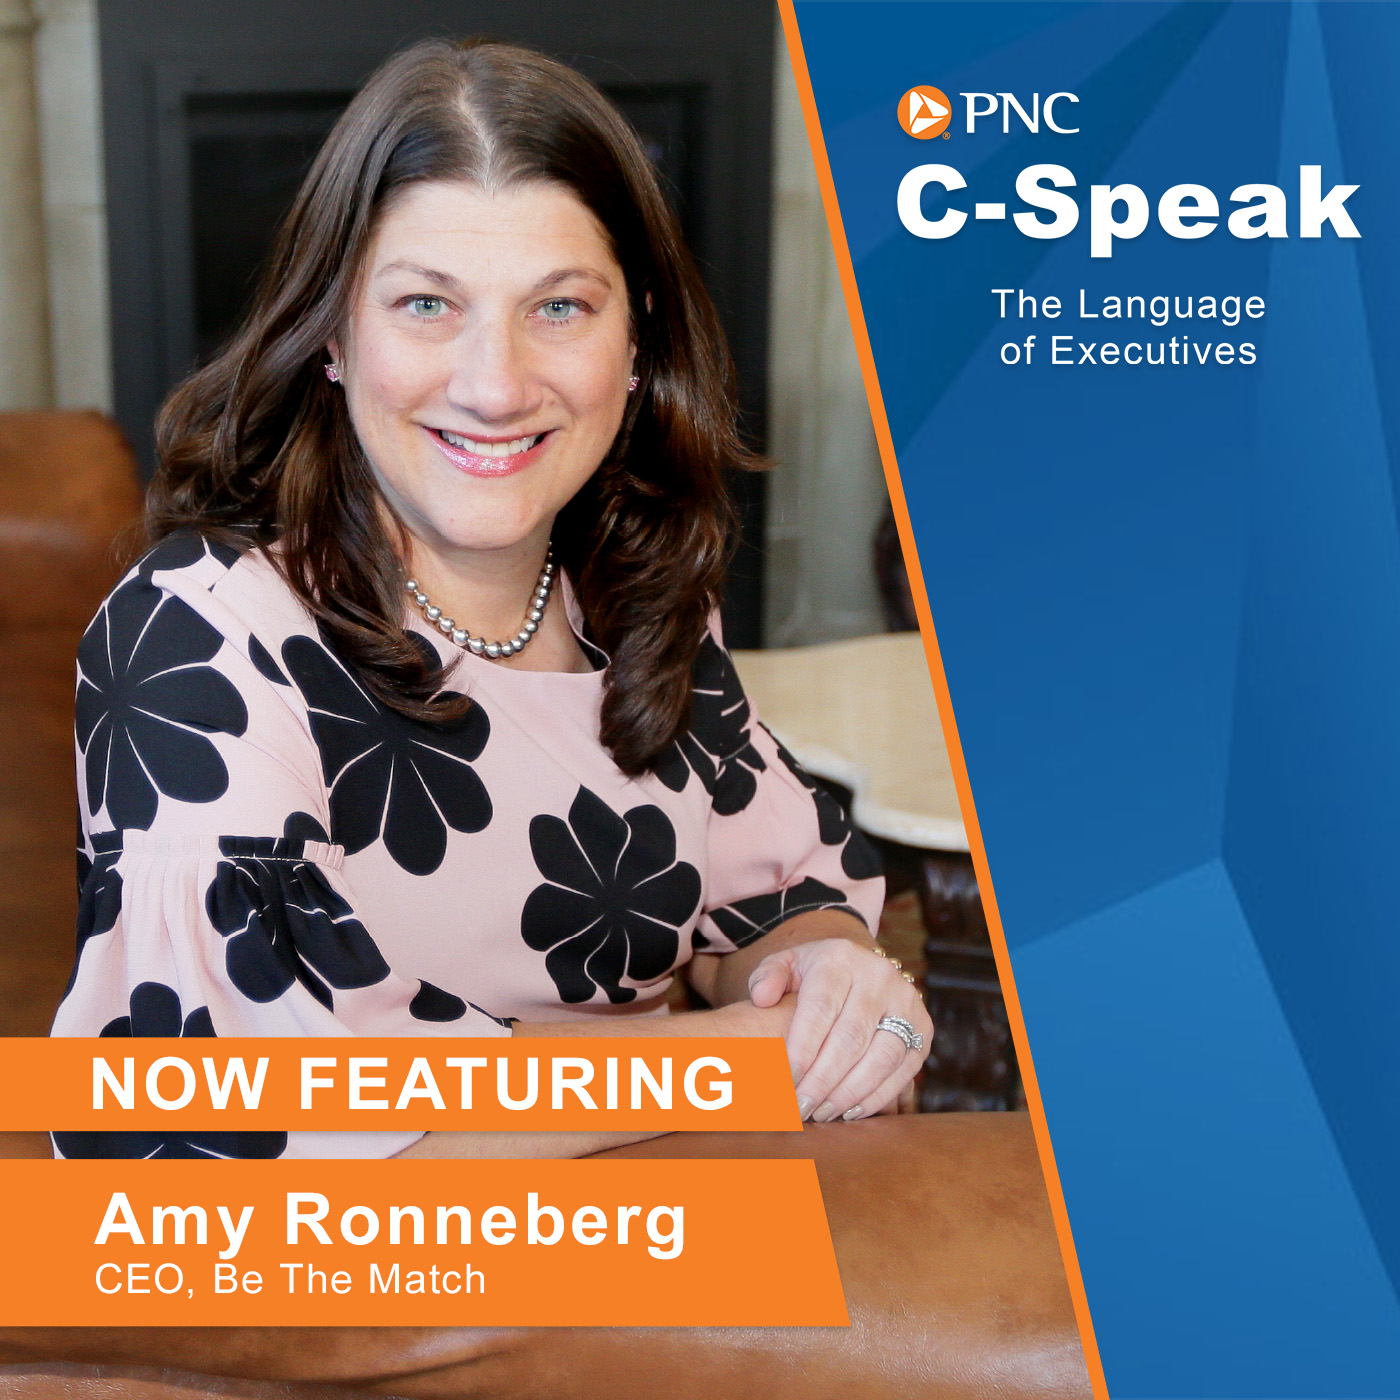 Amy Ronneberg - CEO, Be The Match